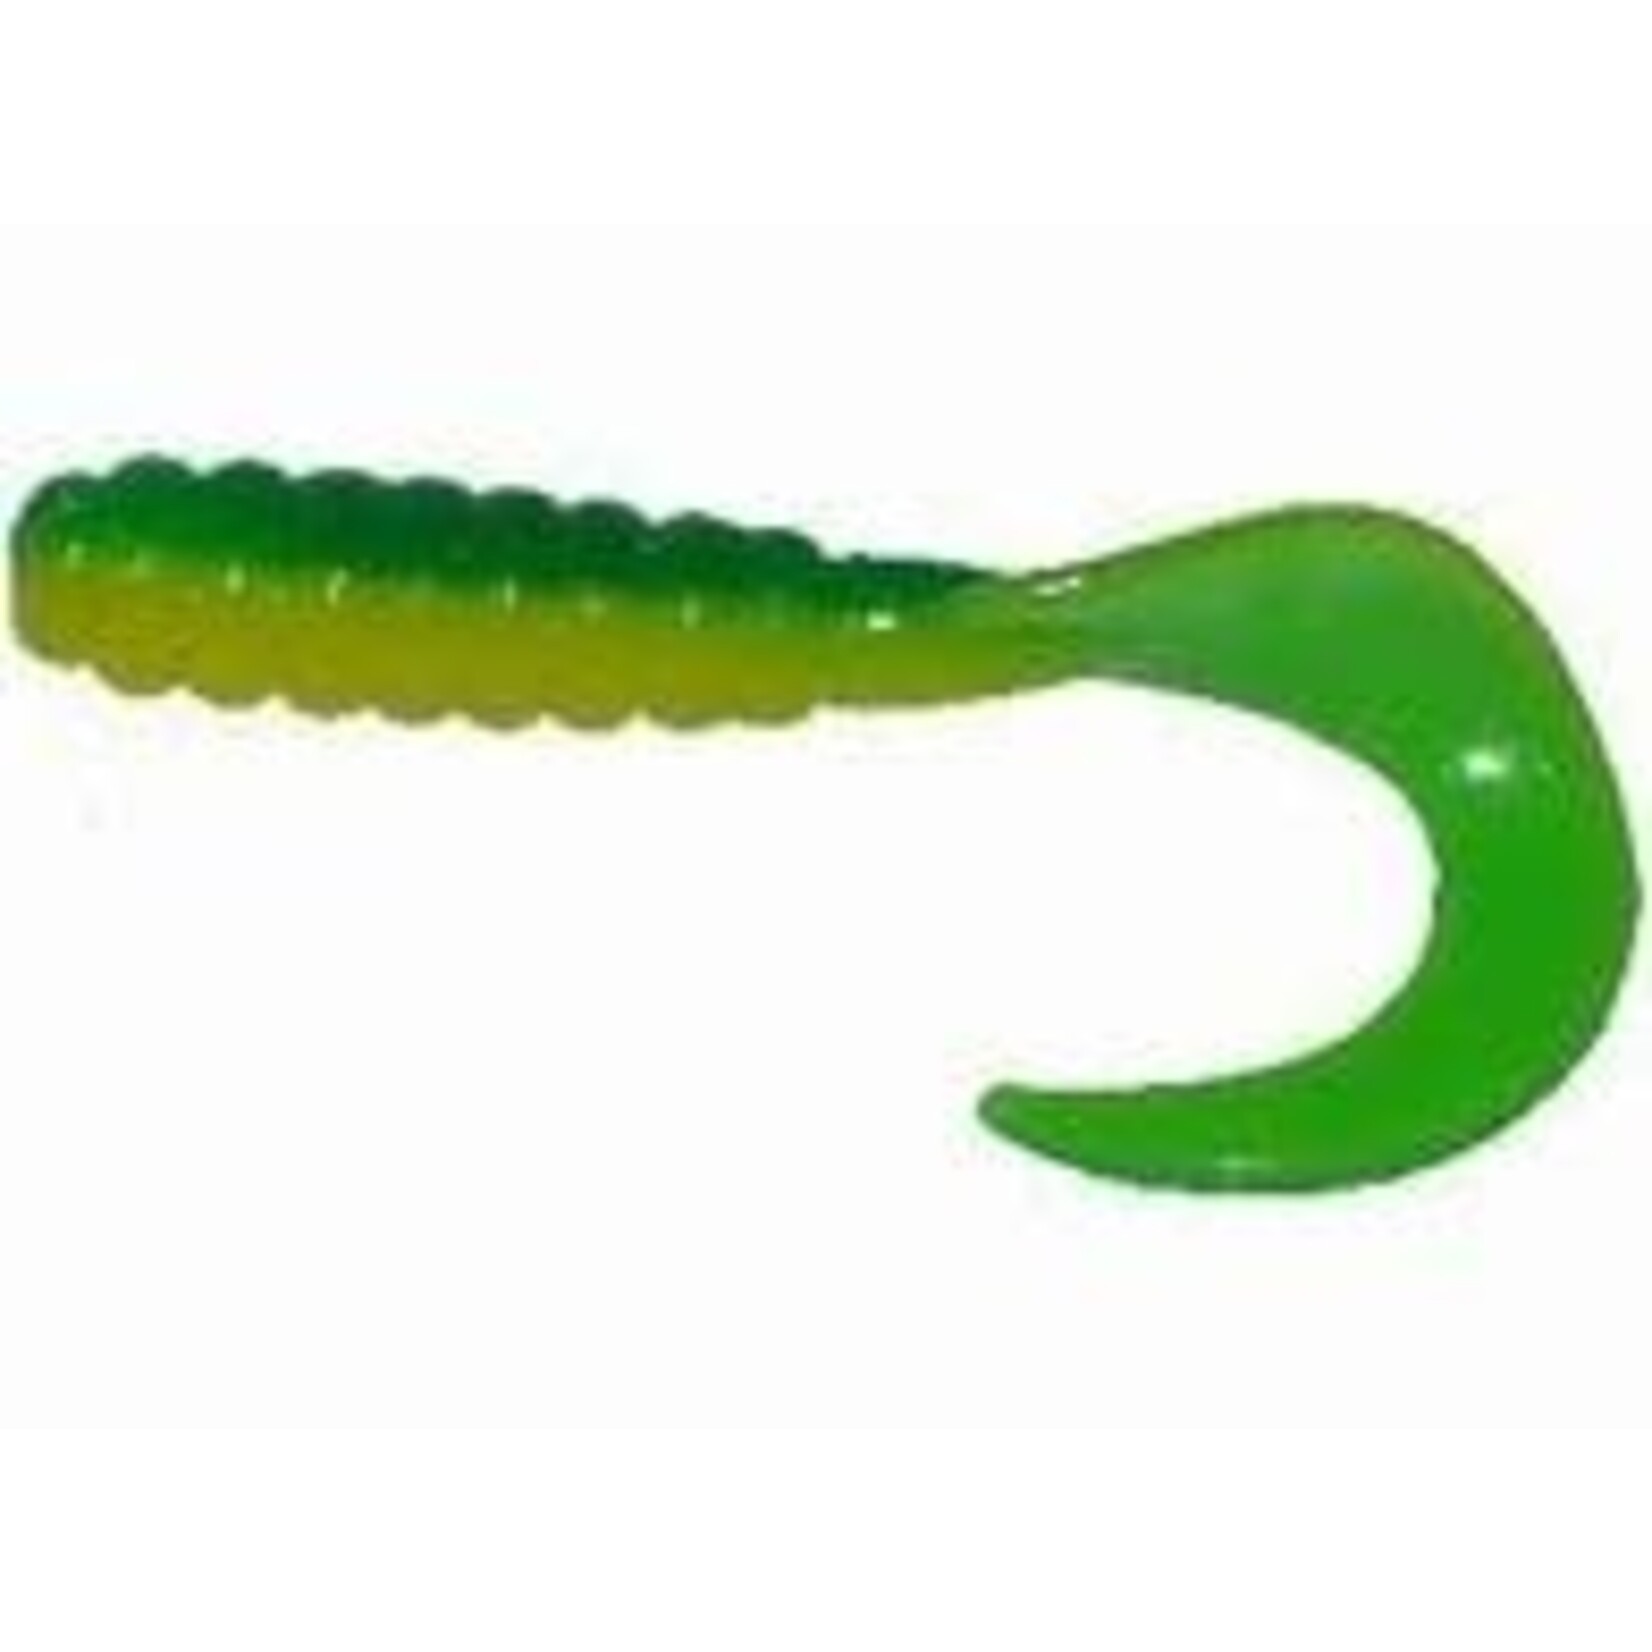 Big Bite Baits 3 Curl Tail Grubs Assorted Colors - Backcountry Supplies